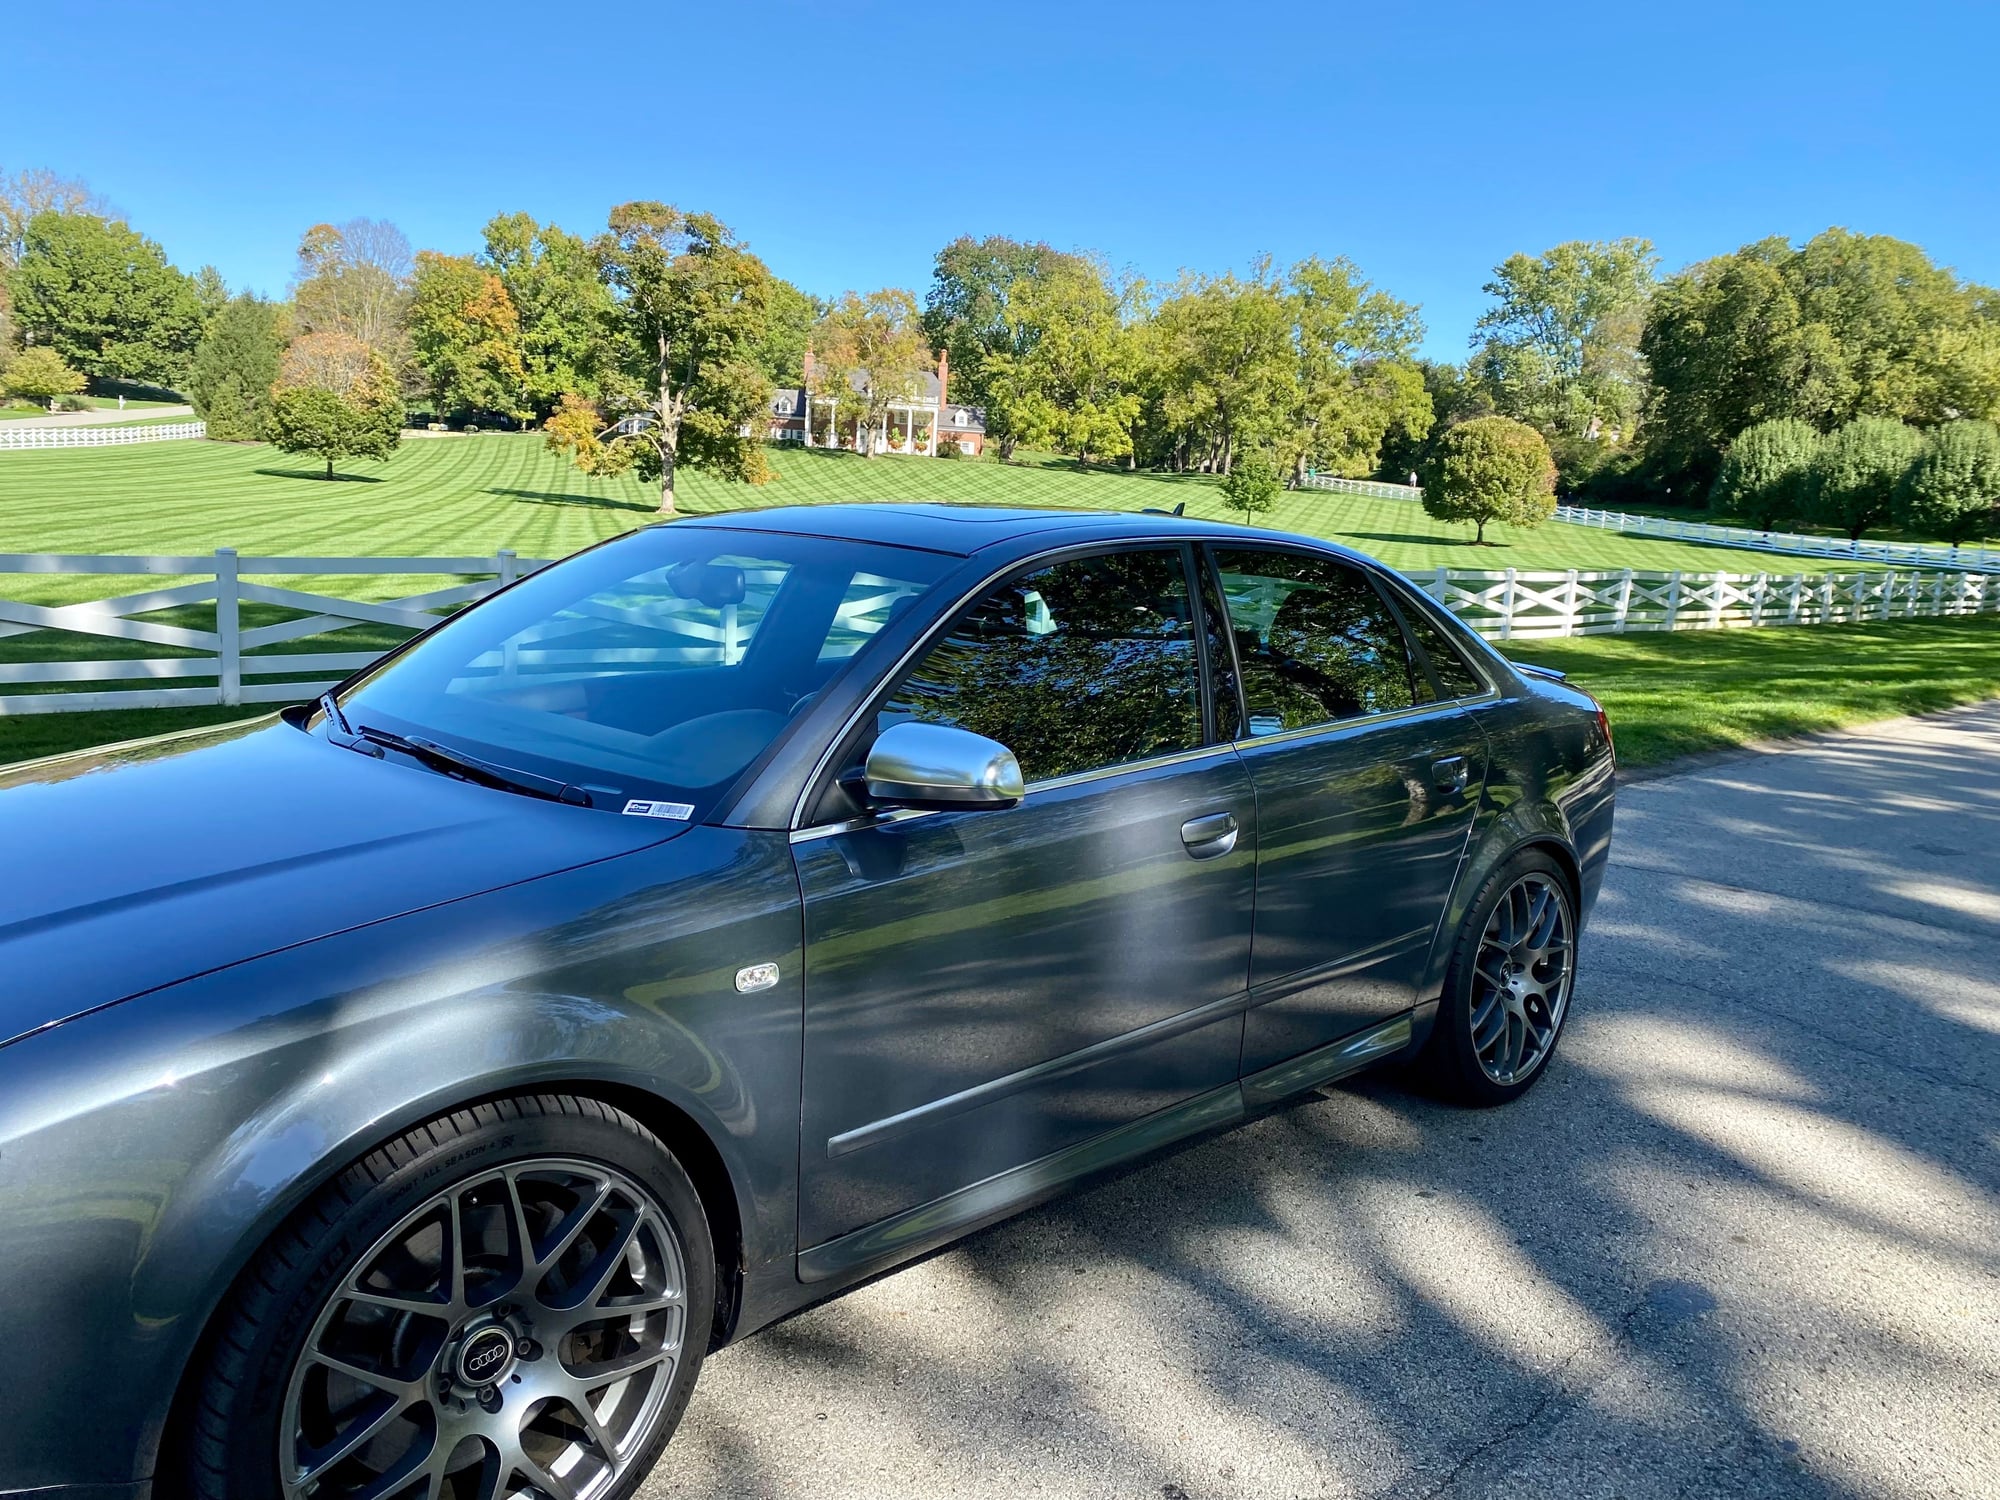 2005 Audi S4 - 2005 Audi S4 - Excellent Shape - Used - VIN WAUPL68E95A058826 - 86,449 Miles - 8 cyl - AWD - Automatic - Sedan - Gray - Indianapolis, IN 46220, United States